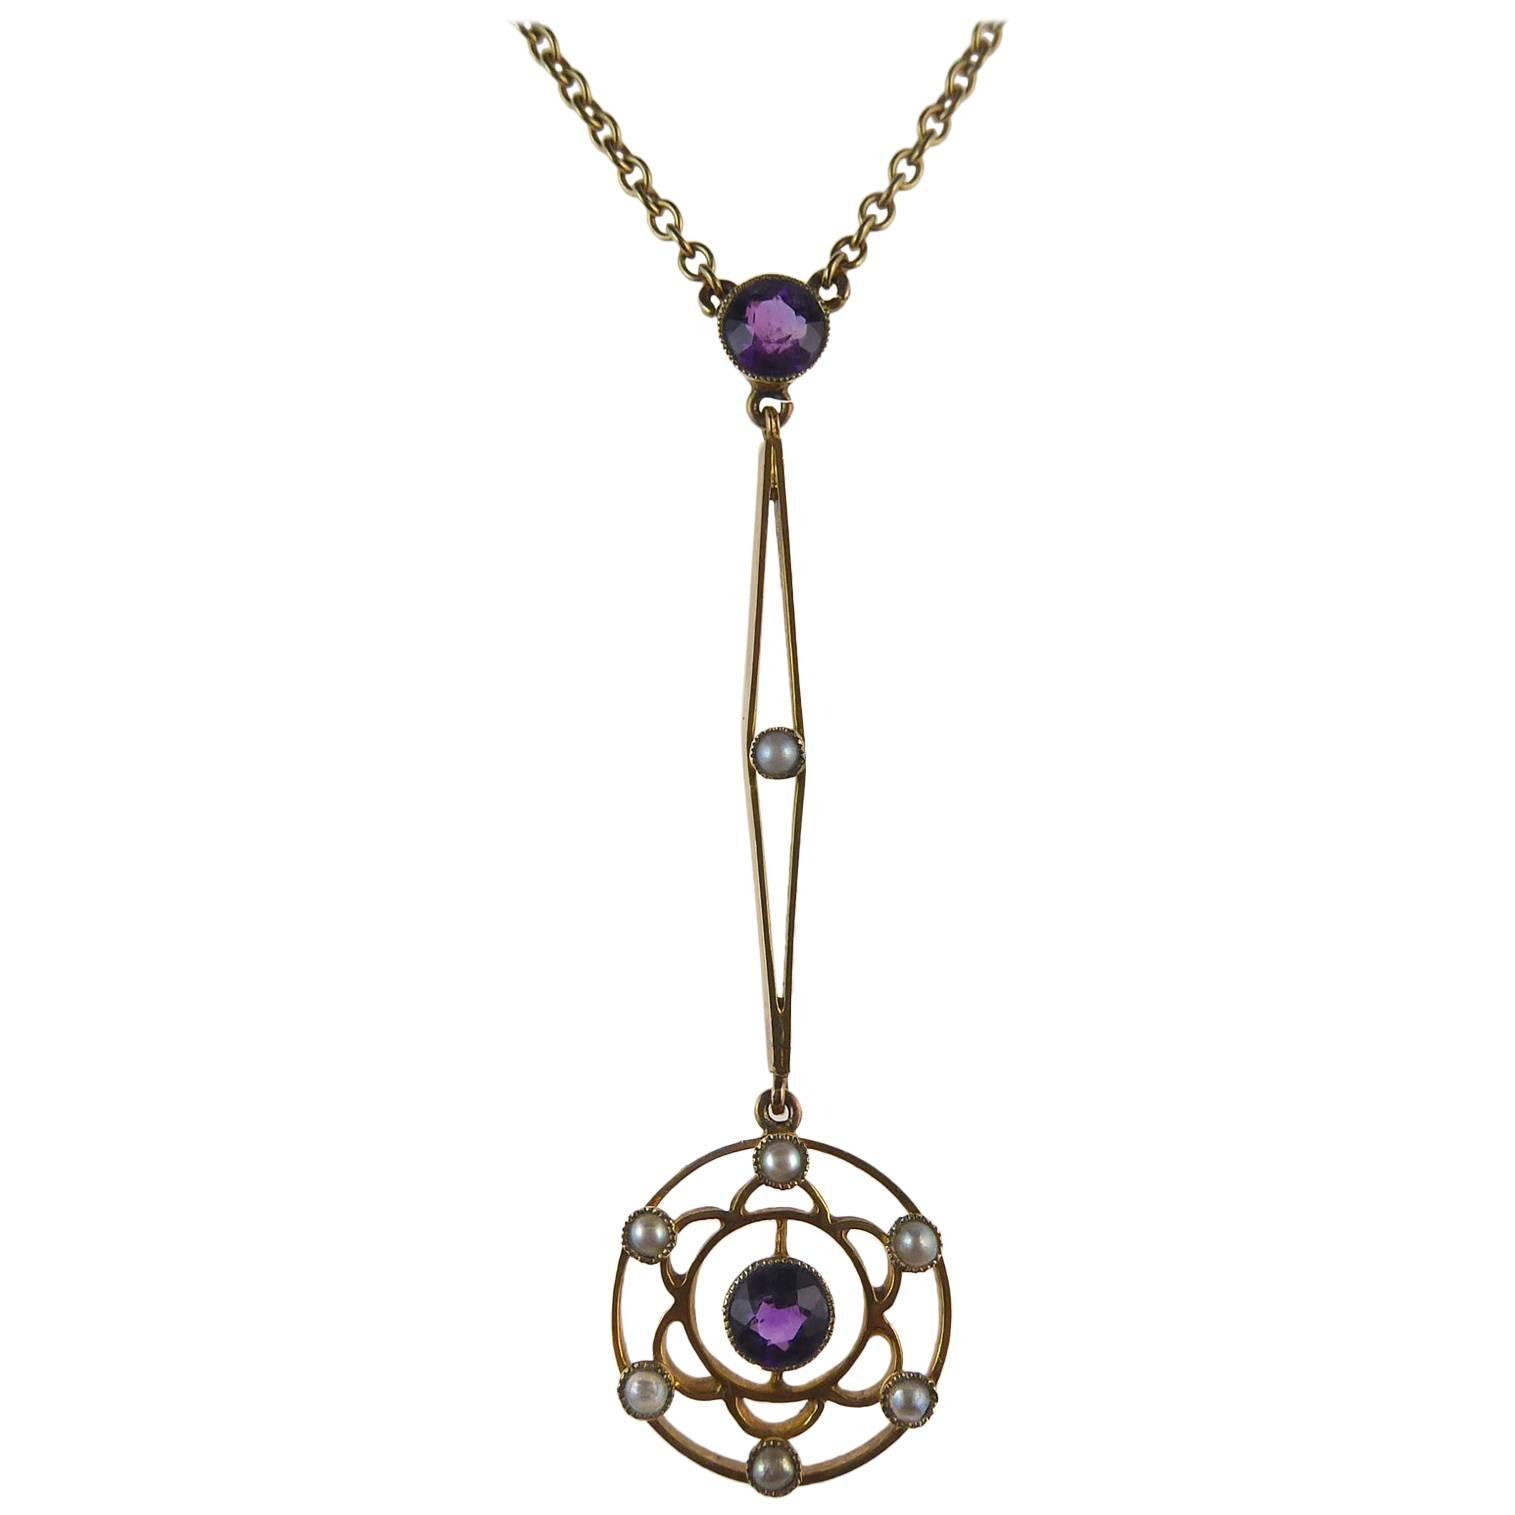 Antique Edwardian Amethyst and Pearl Pendant